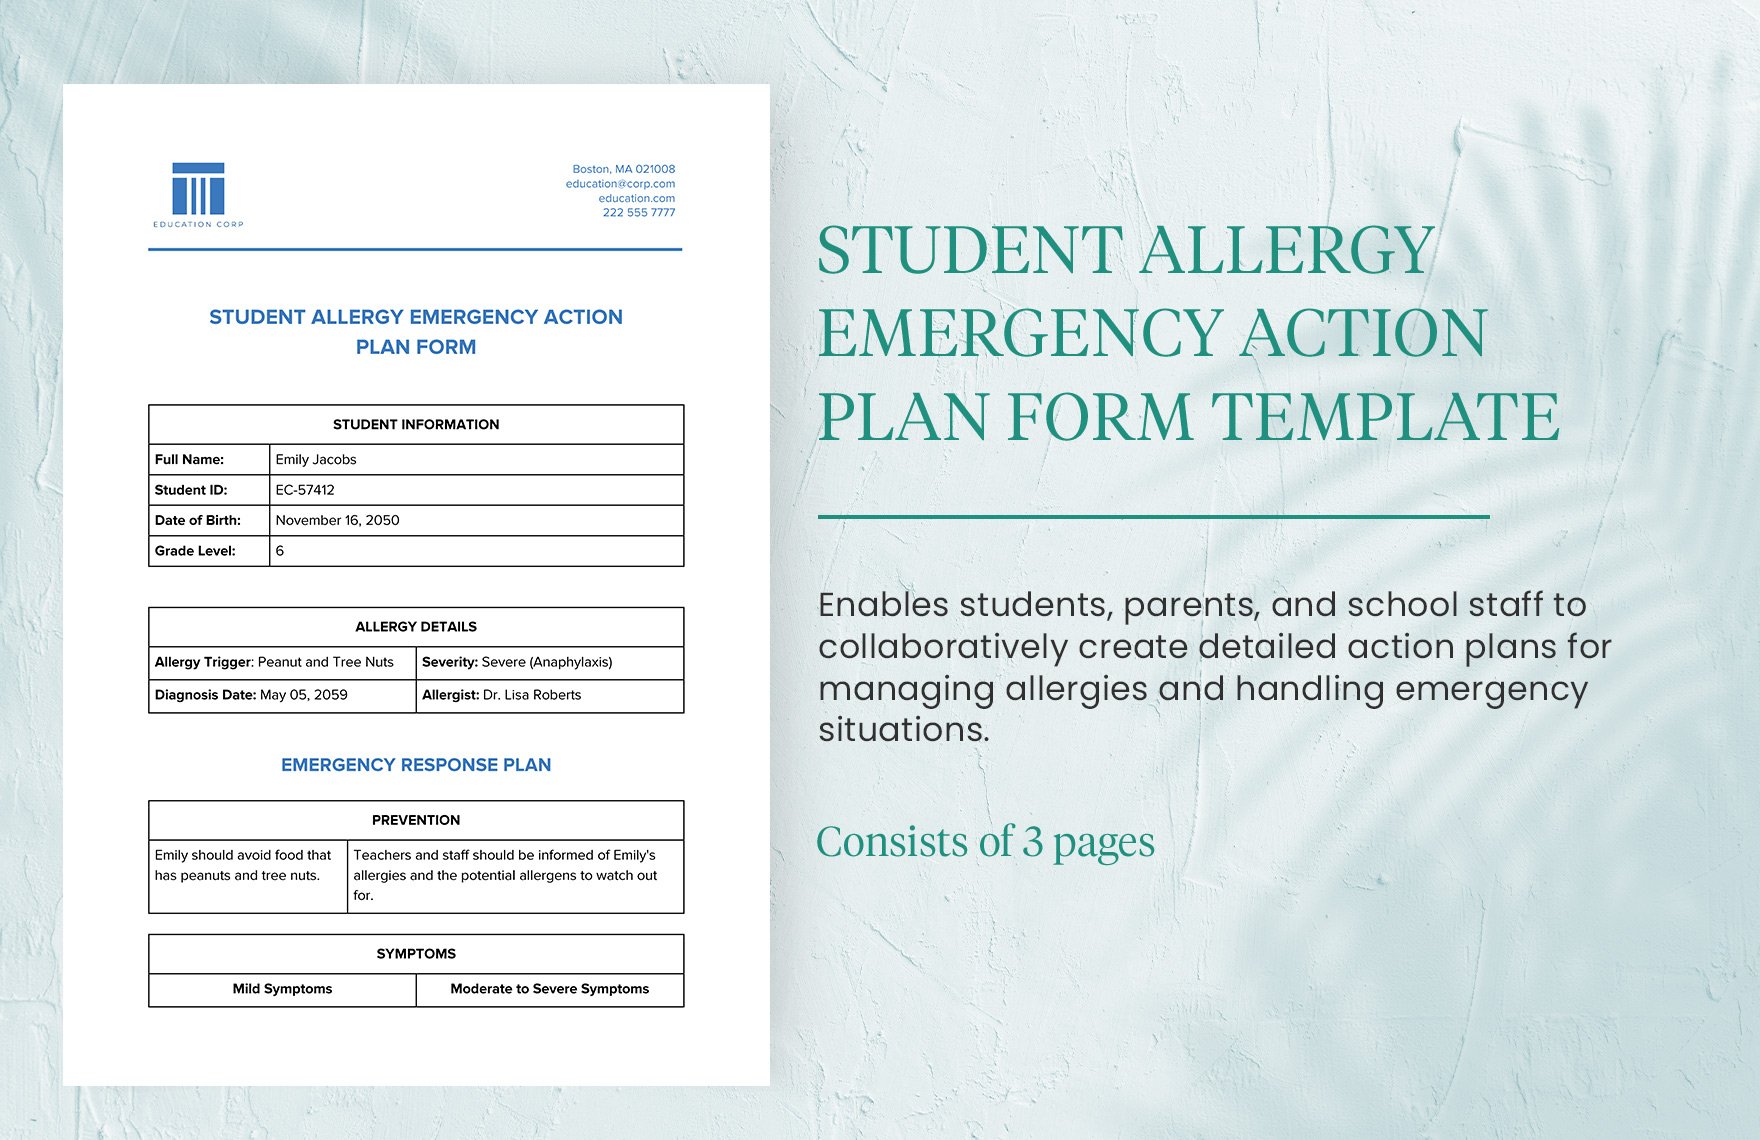 Student Allergy Emergency Action Plan Form Template